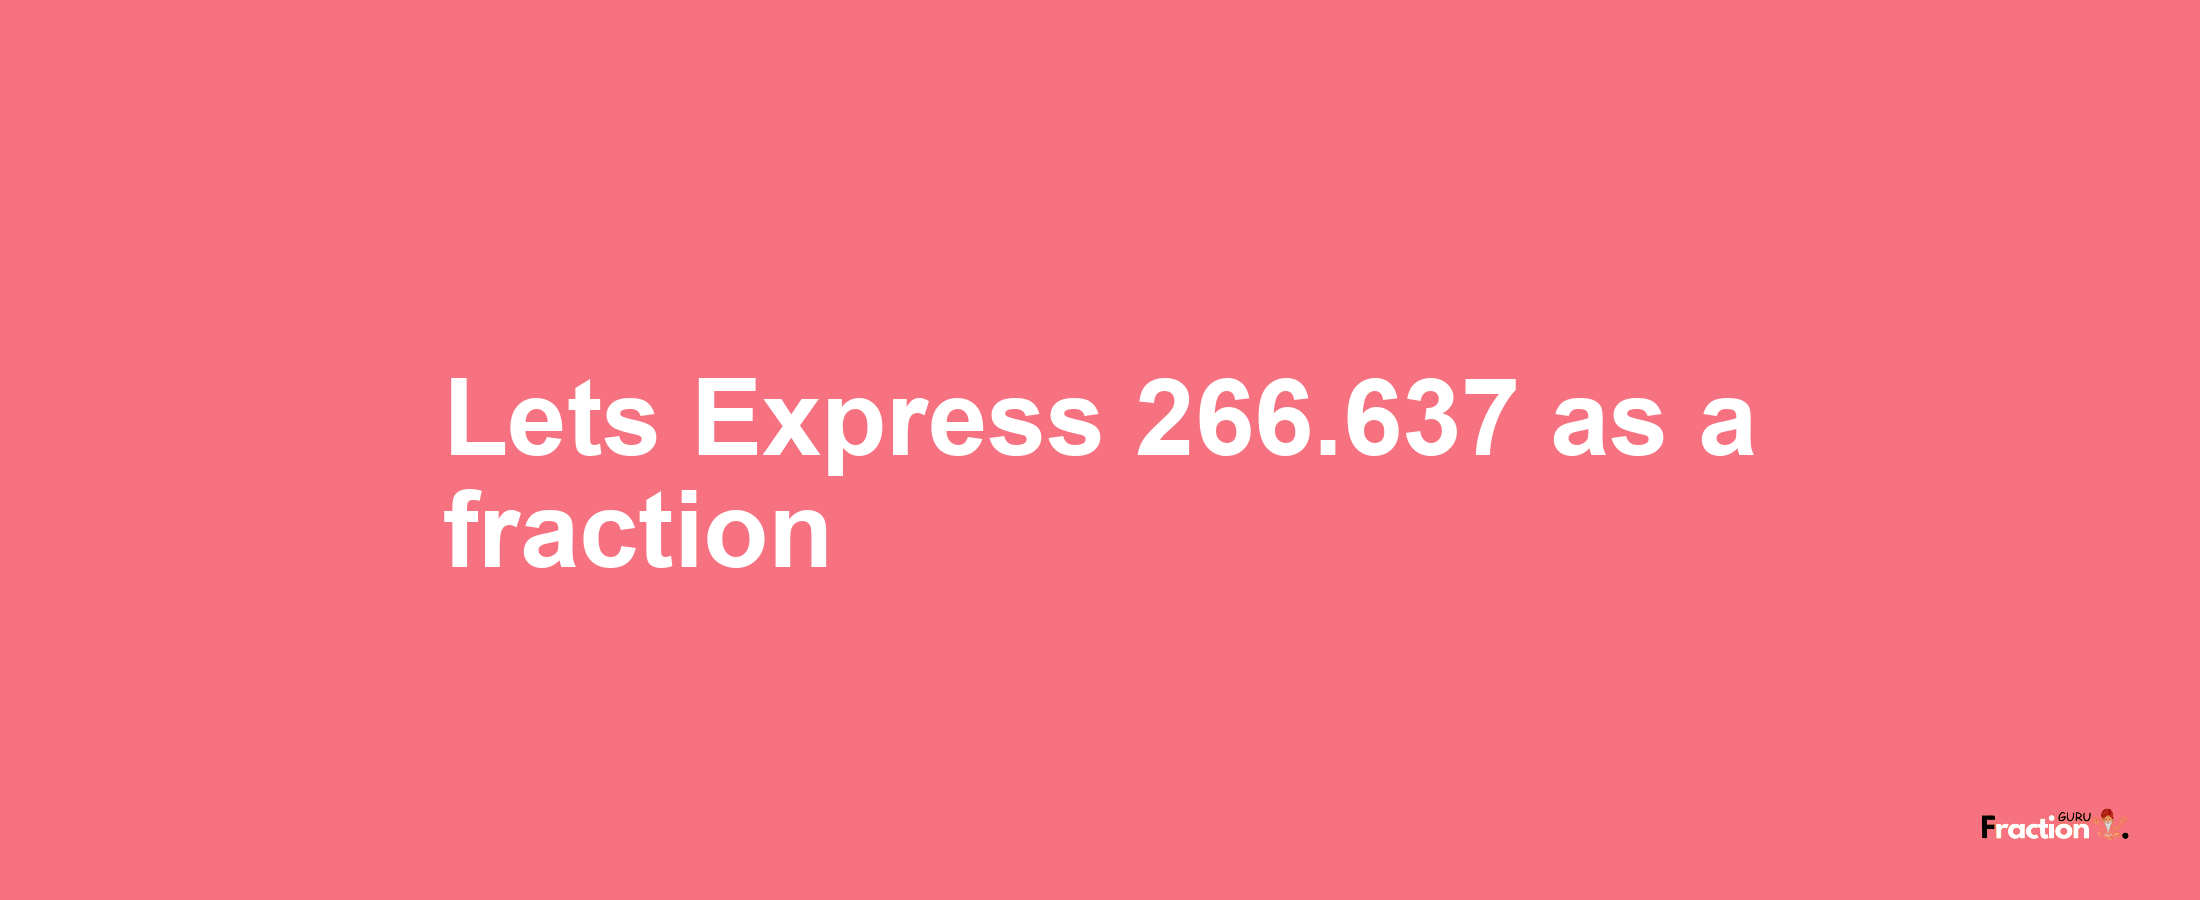 Lets Express 266.637 as afraction